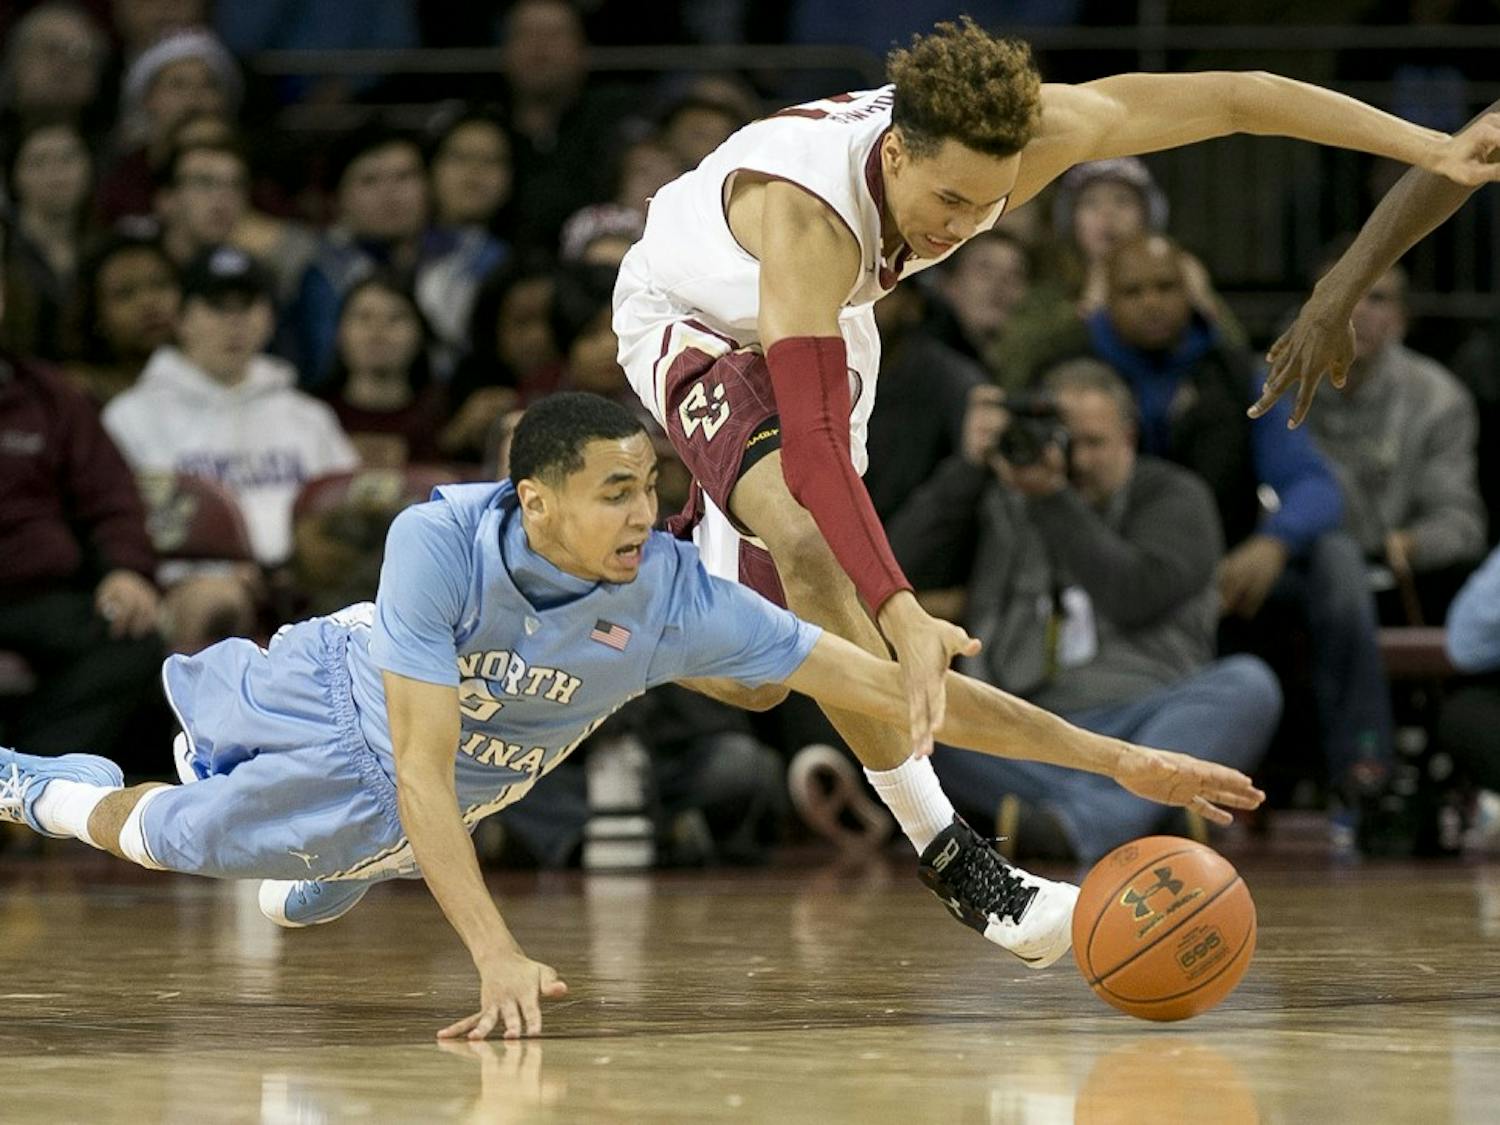 North Carolina&apos;s Marcus Paige (5) and Boston College&apos;s A.J. Turner (11) go after a loose ball in the first half on Tuesday, Feb. 9, 2016, at Conte Forum in Chestnut Hill, Mass. (Robert Willett/Raleigh News &amp; Observer/TNS)